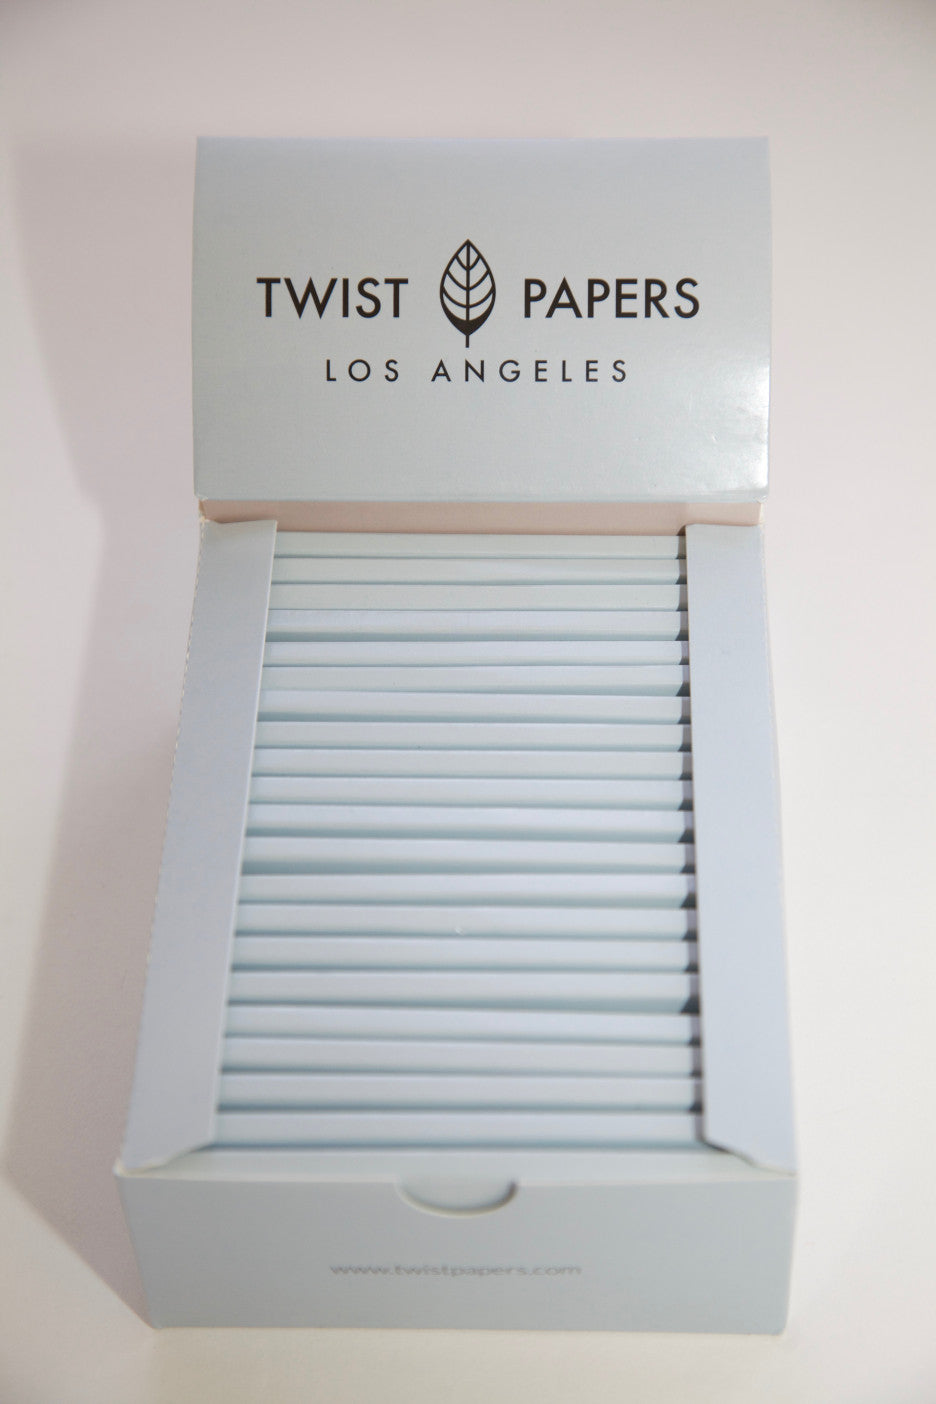 (BOX) Light Blue Rolling Papers